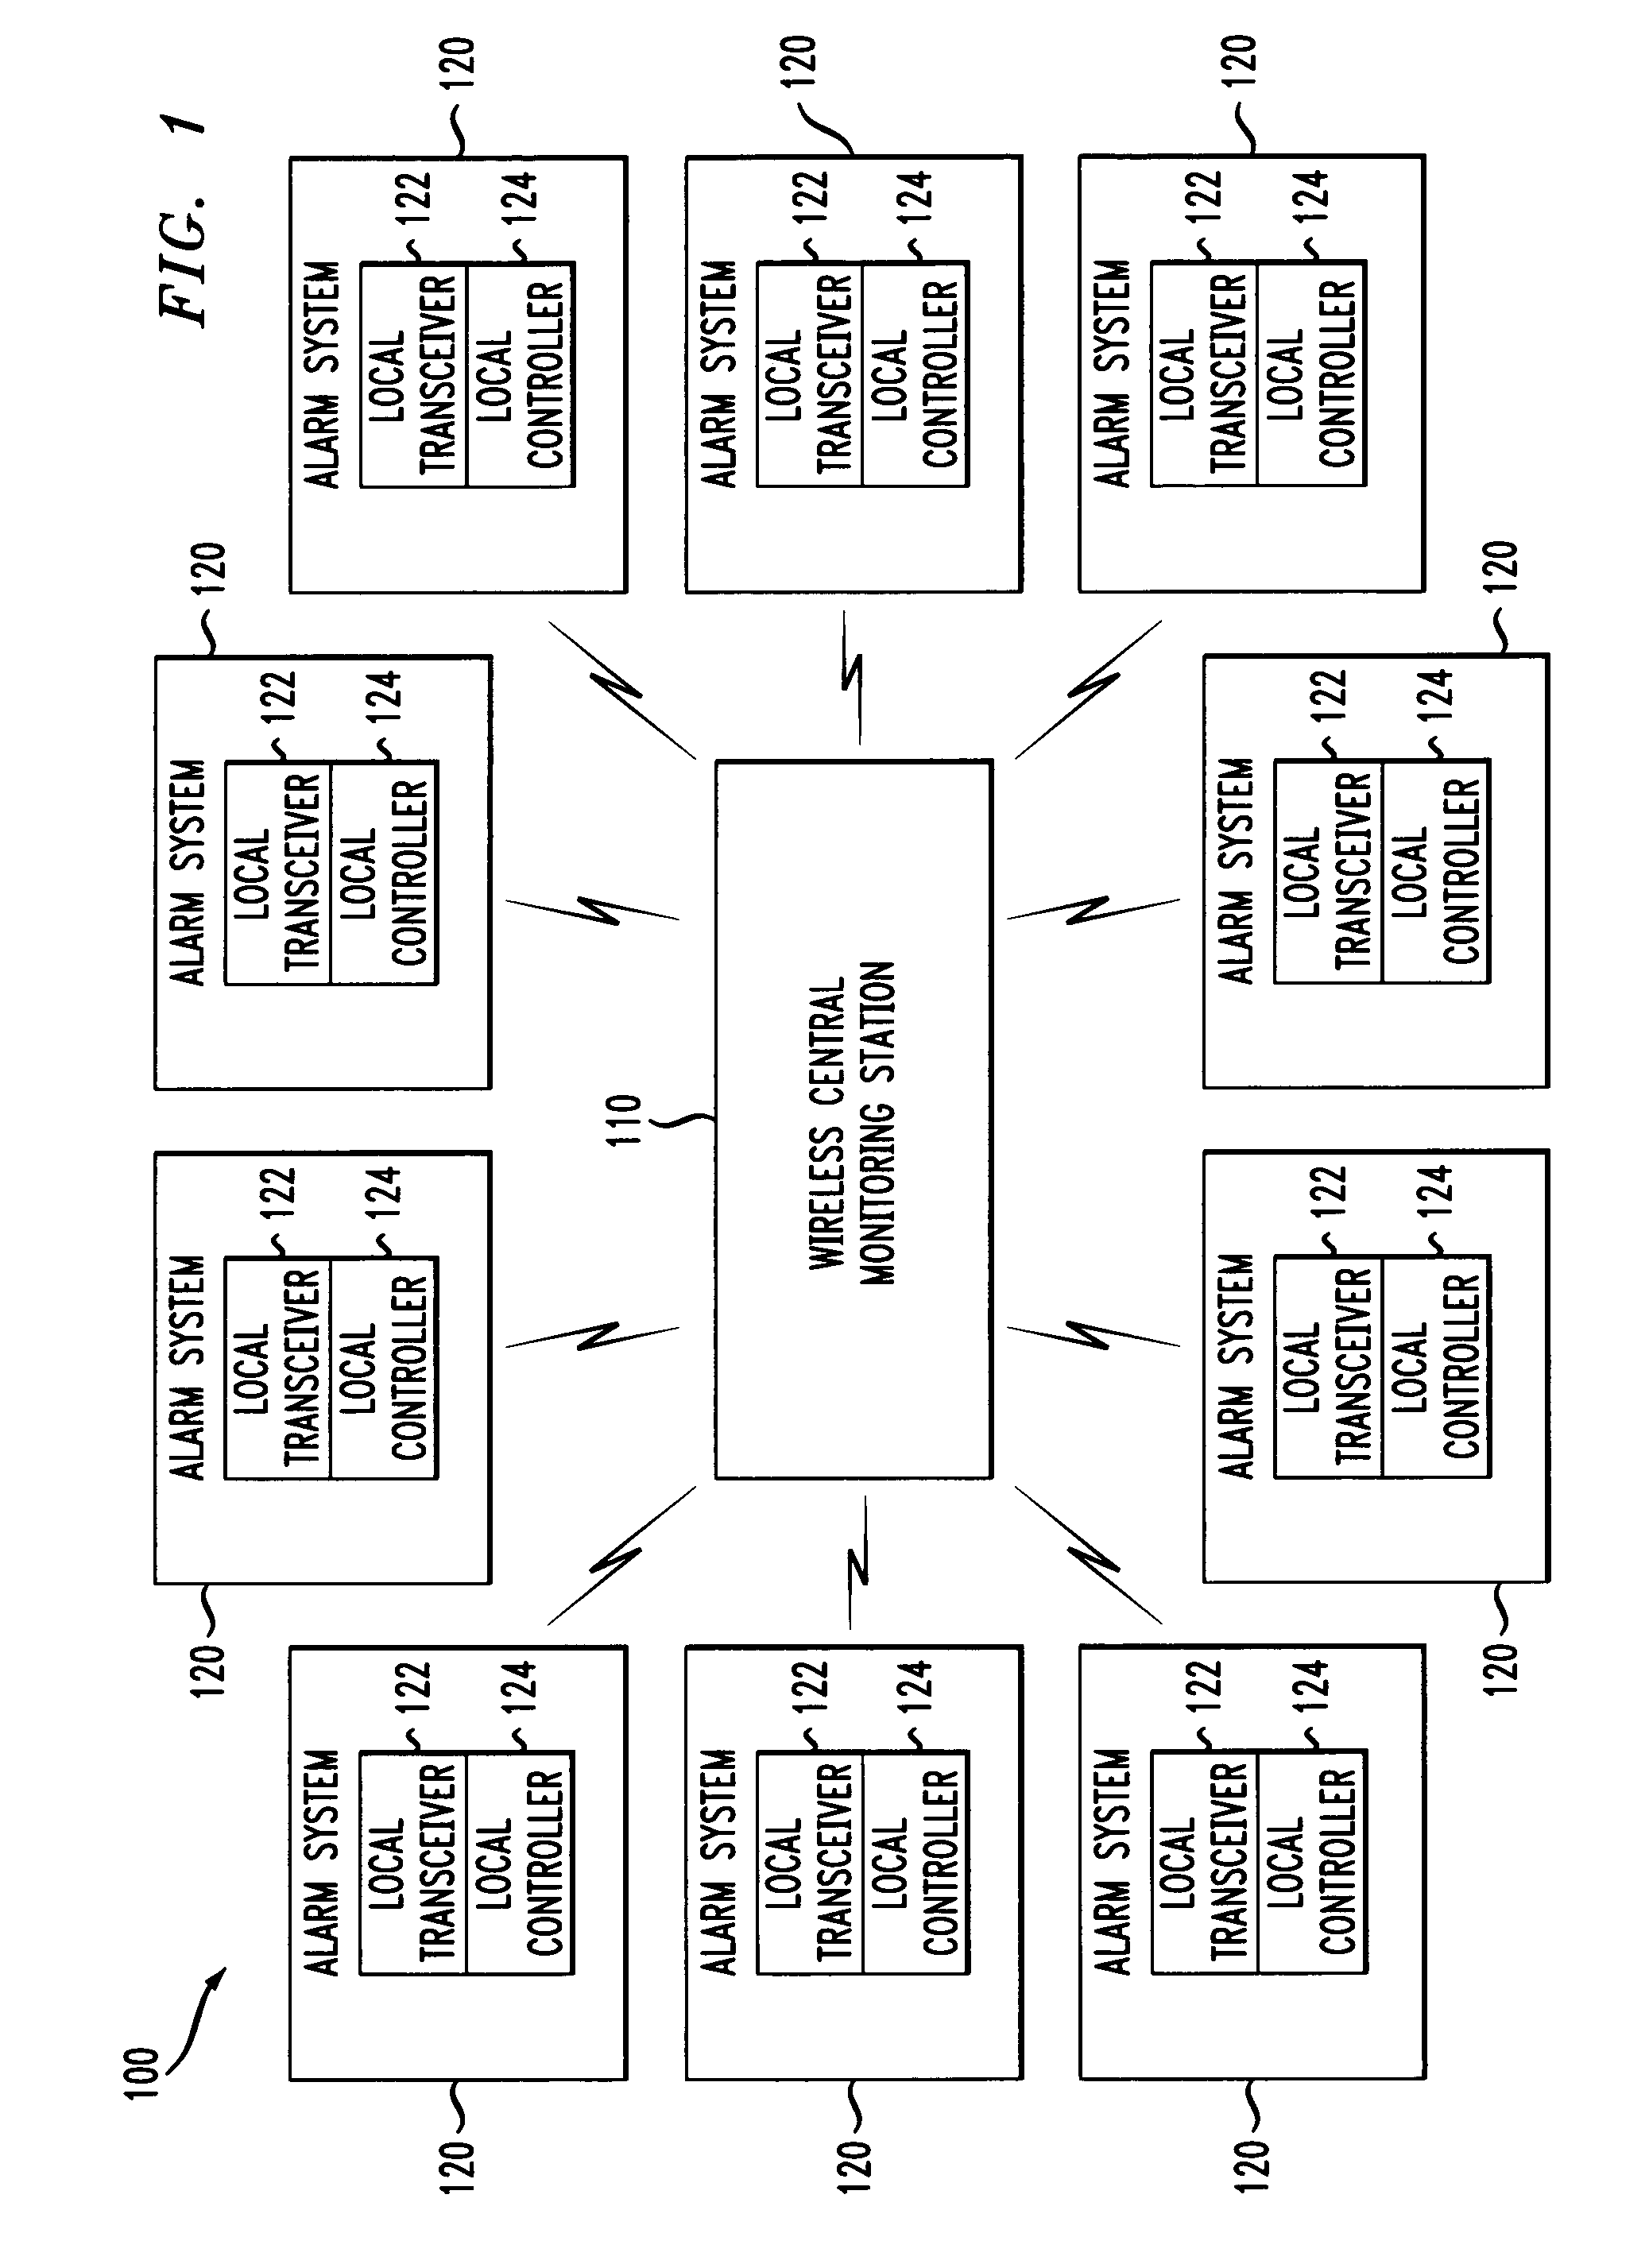 Intermittent, low bandwidth, wireless data network and method of operation thereof